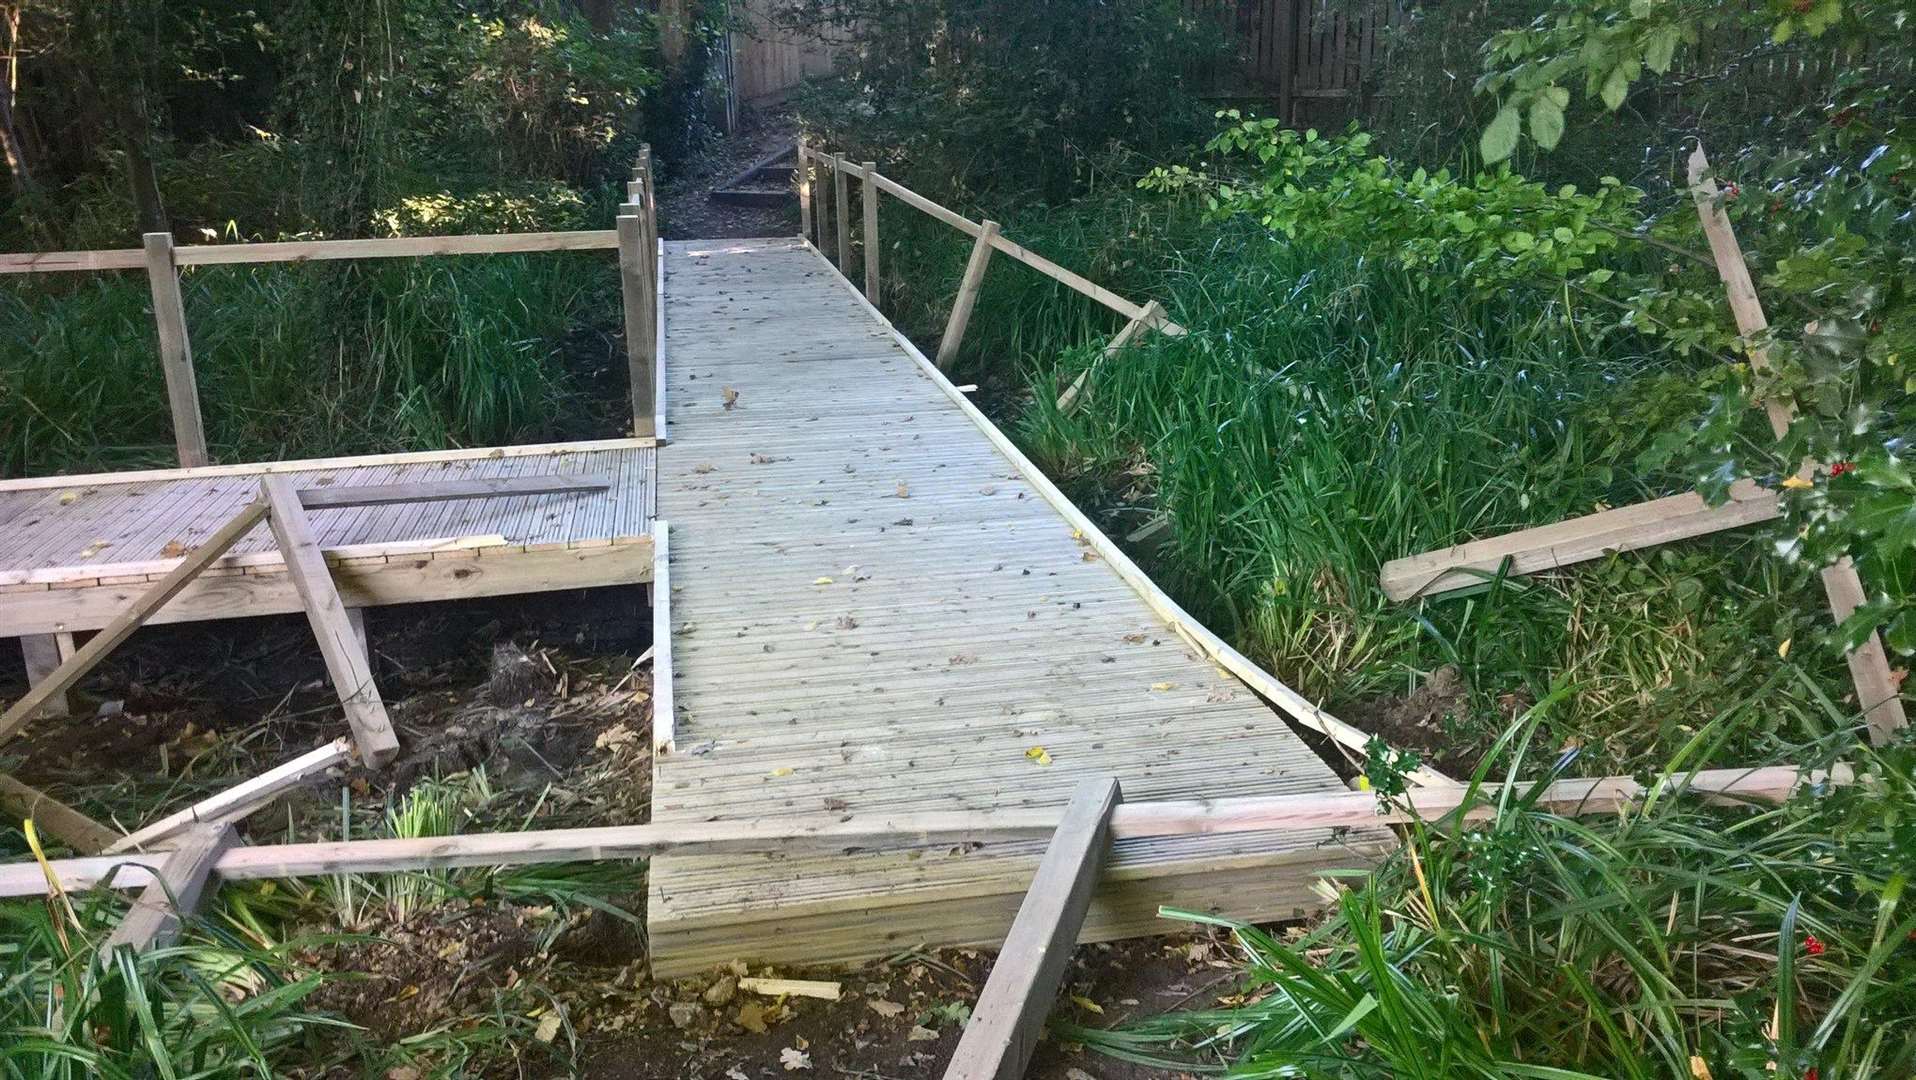 Vandals damaged the newly constructed walkway